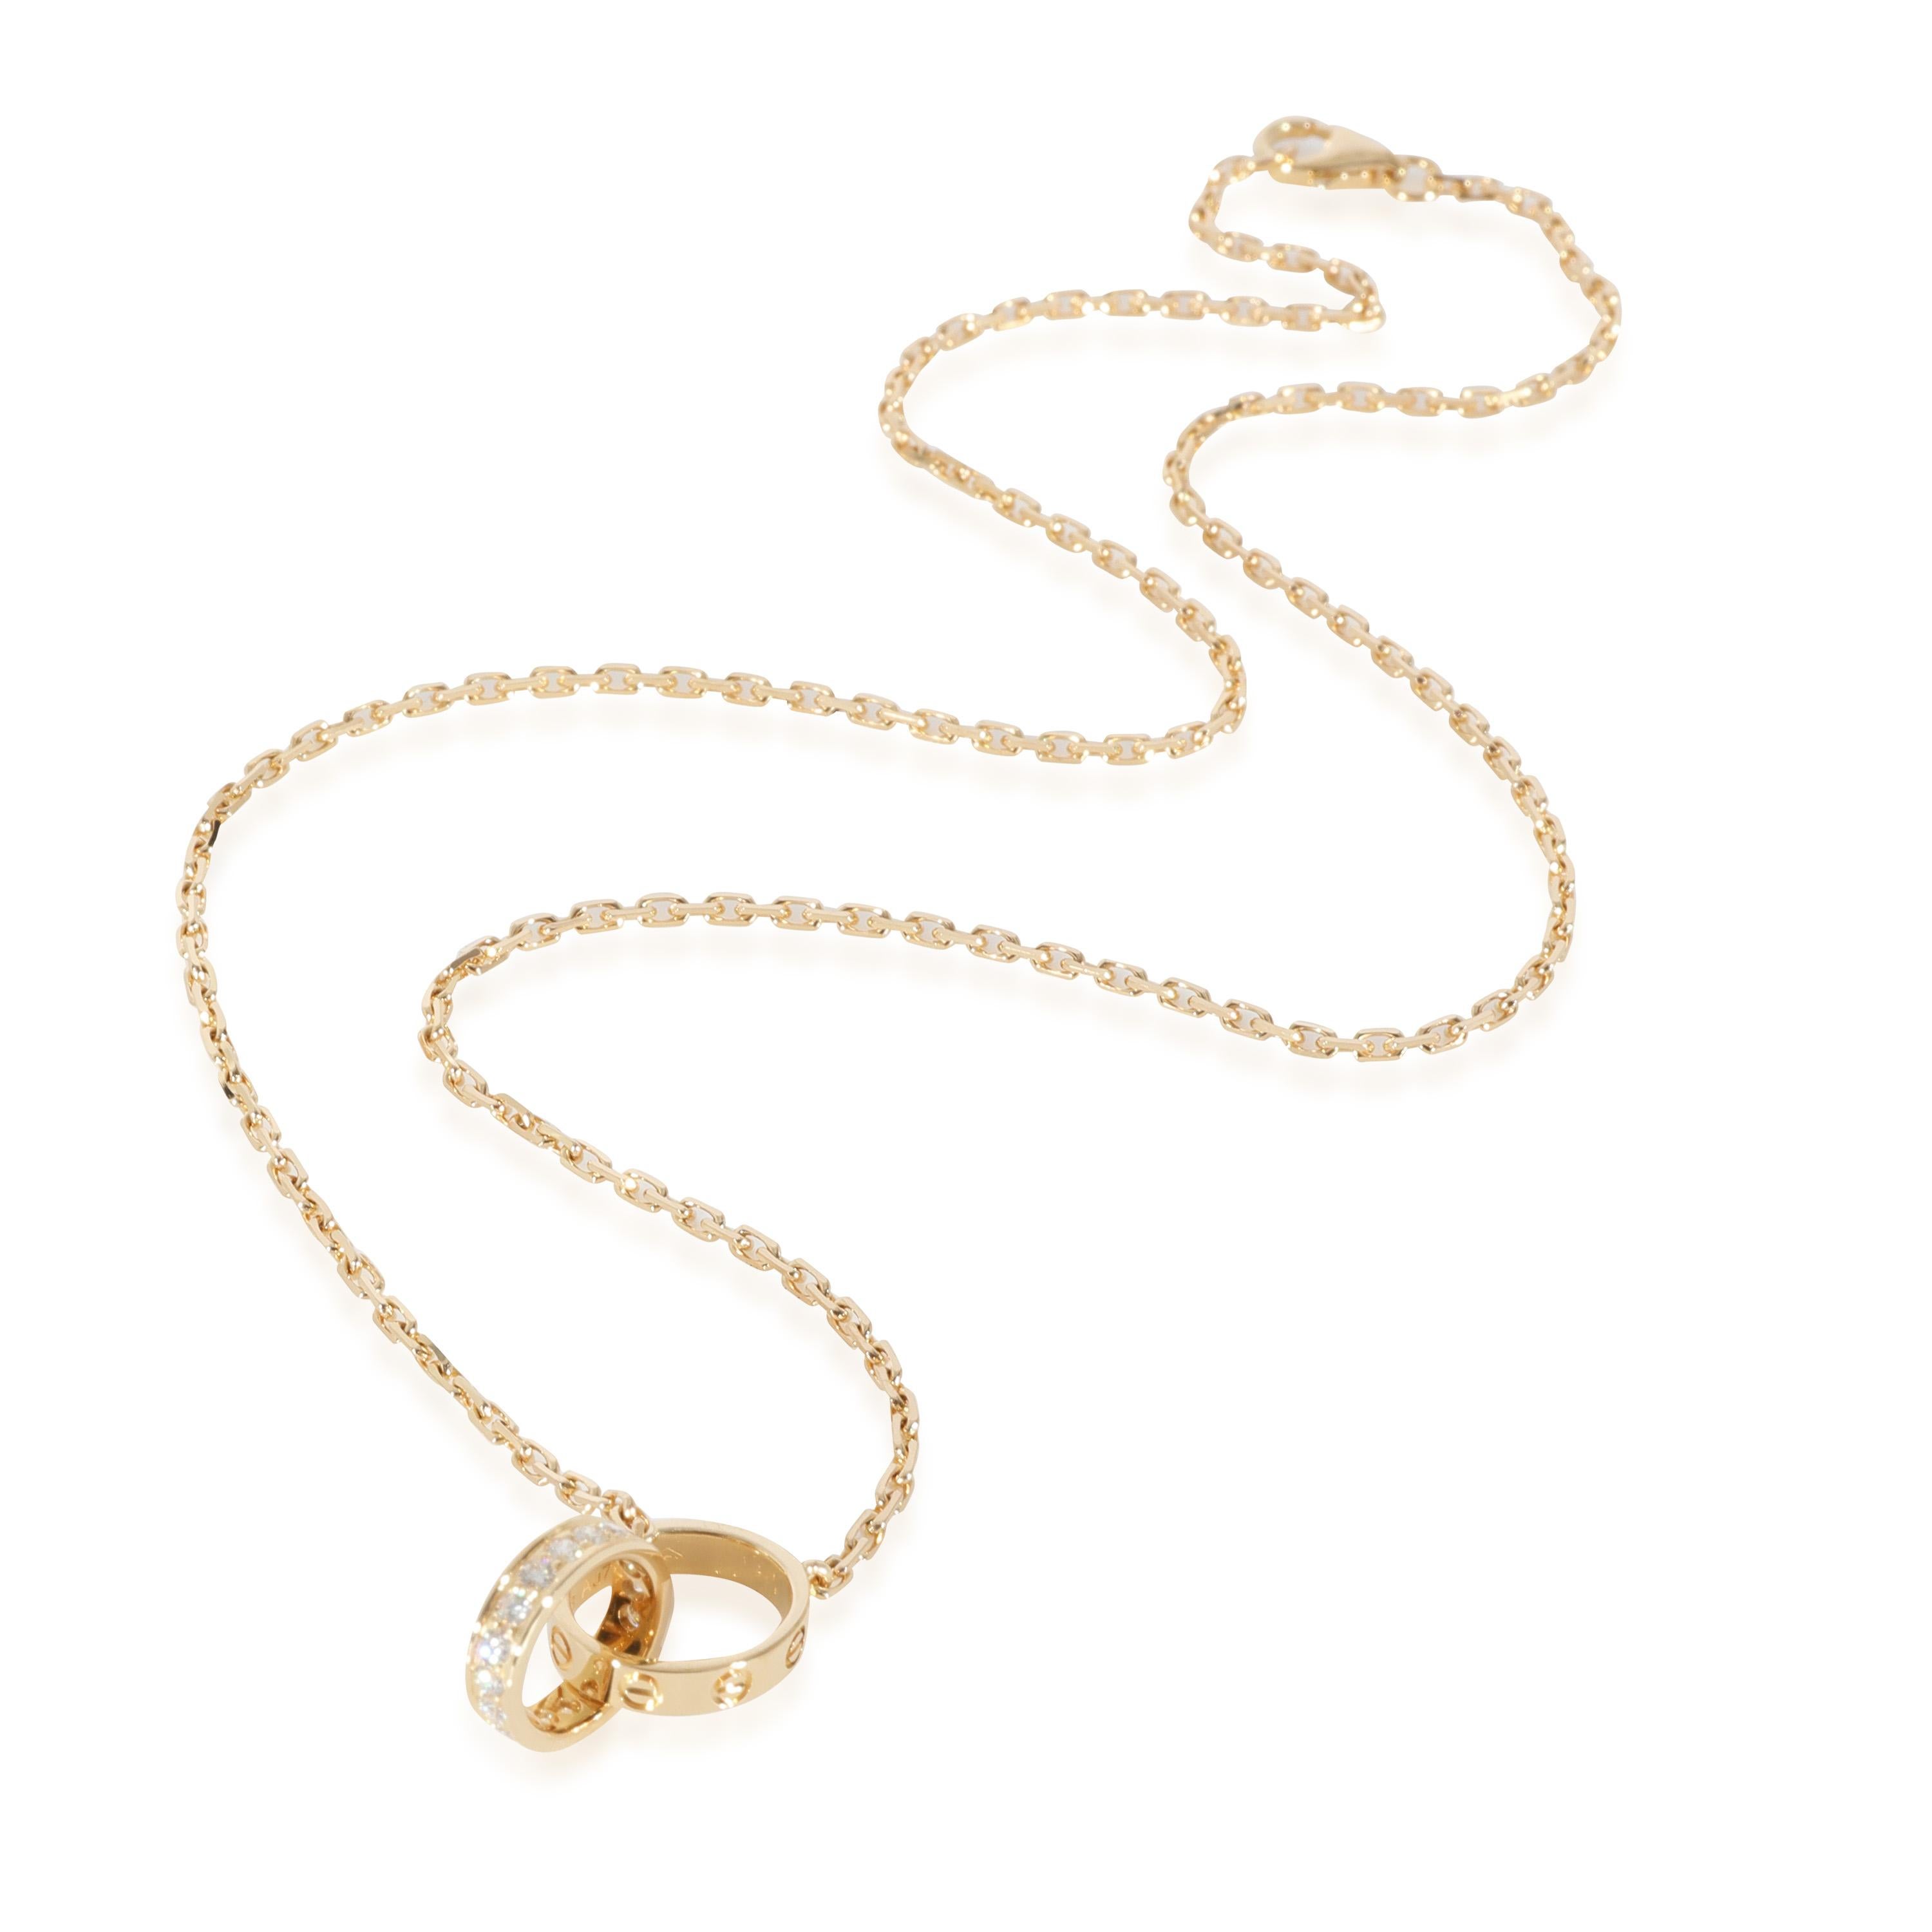 Cartier Interlocking Circle Love Necklace With Diamonds 0.22 CTW

PRIMARY DETAILS
SKU: 129629
Listing Title: Cartier Interlocking Circle Love Necklace With Diamonds 0.22 CTW
Condition Description: Cartier's Love collection is the epitome of iconic,